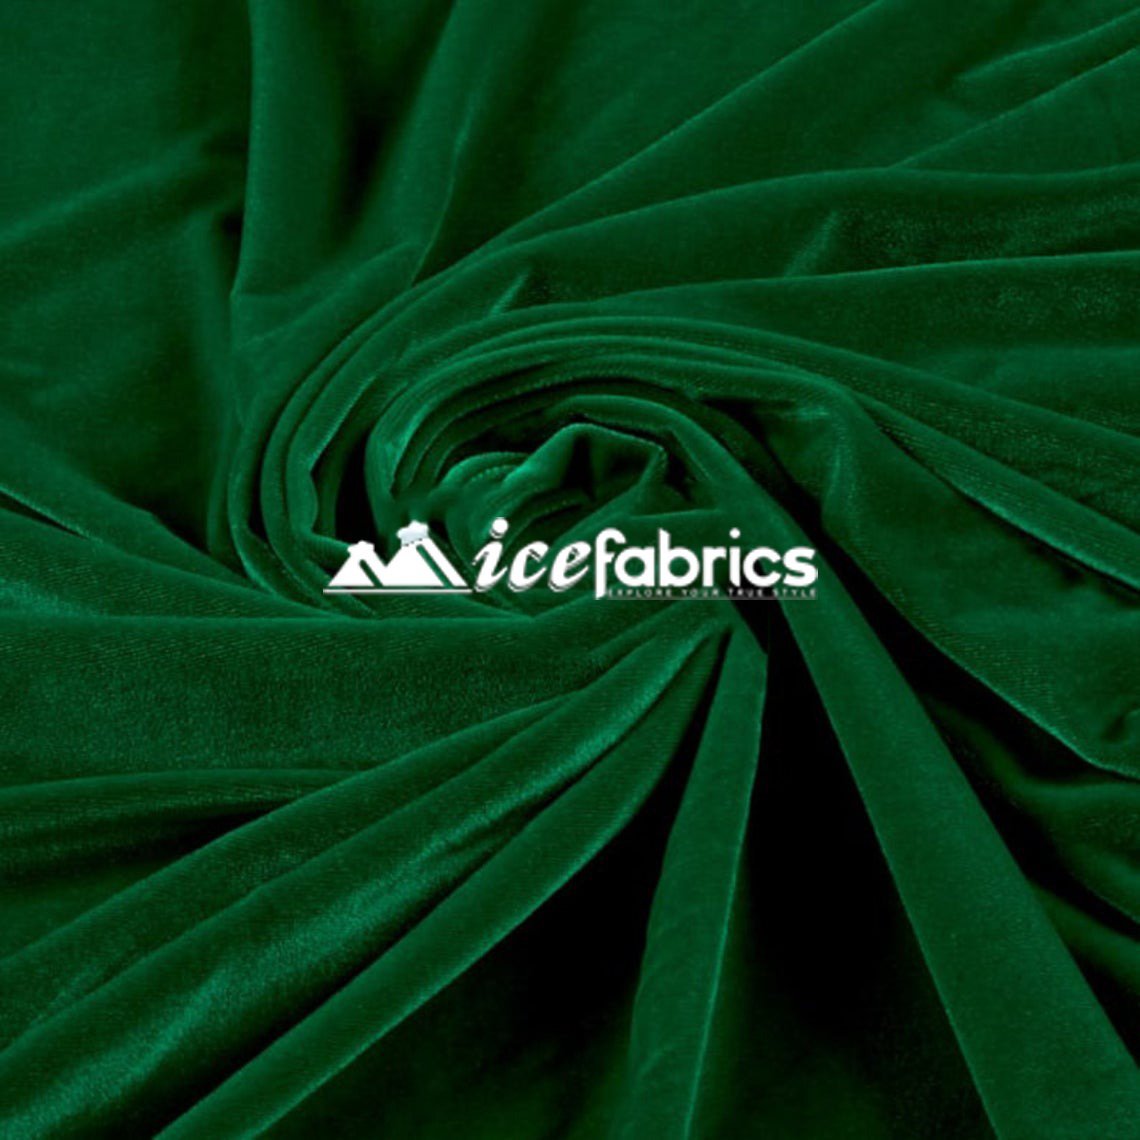 Hight Quality Stretch Velvet Fabric By The Roll (20 yards) Wholesale FabricVelvet FabricICE FABRICSICE FABRICSFlag GreenBy The Roll (60" Wide)Hight Quality Stretch Velvet Fabric By The Roll (20 yards) Wholesale Fabric ICE FABRICS Flag Green